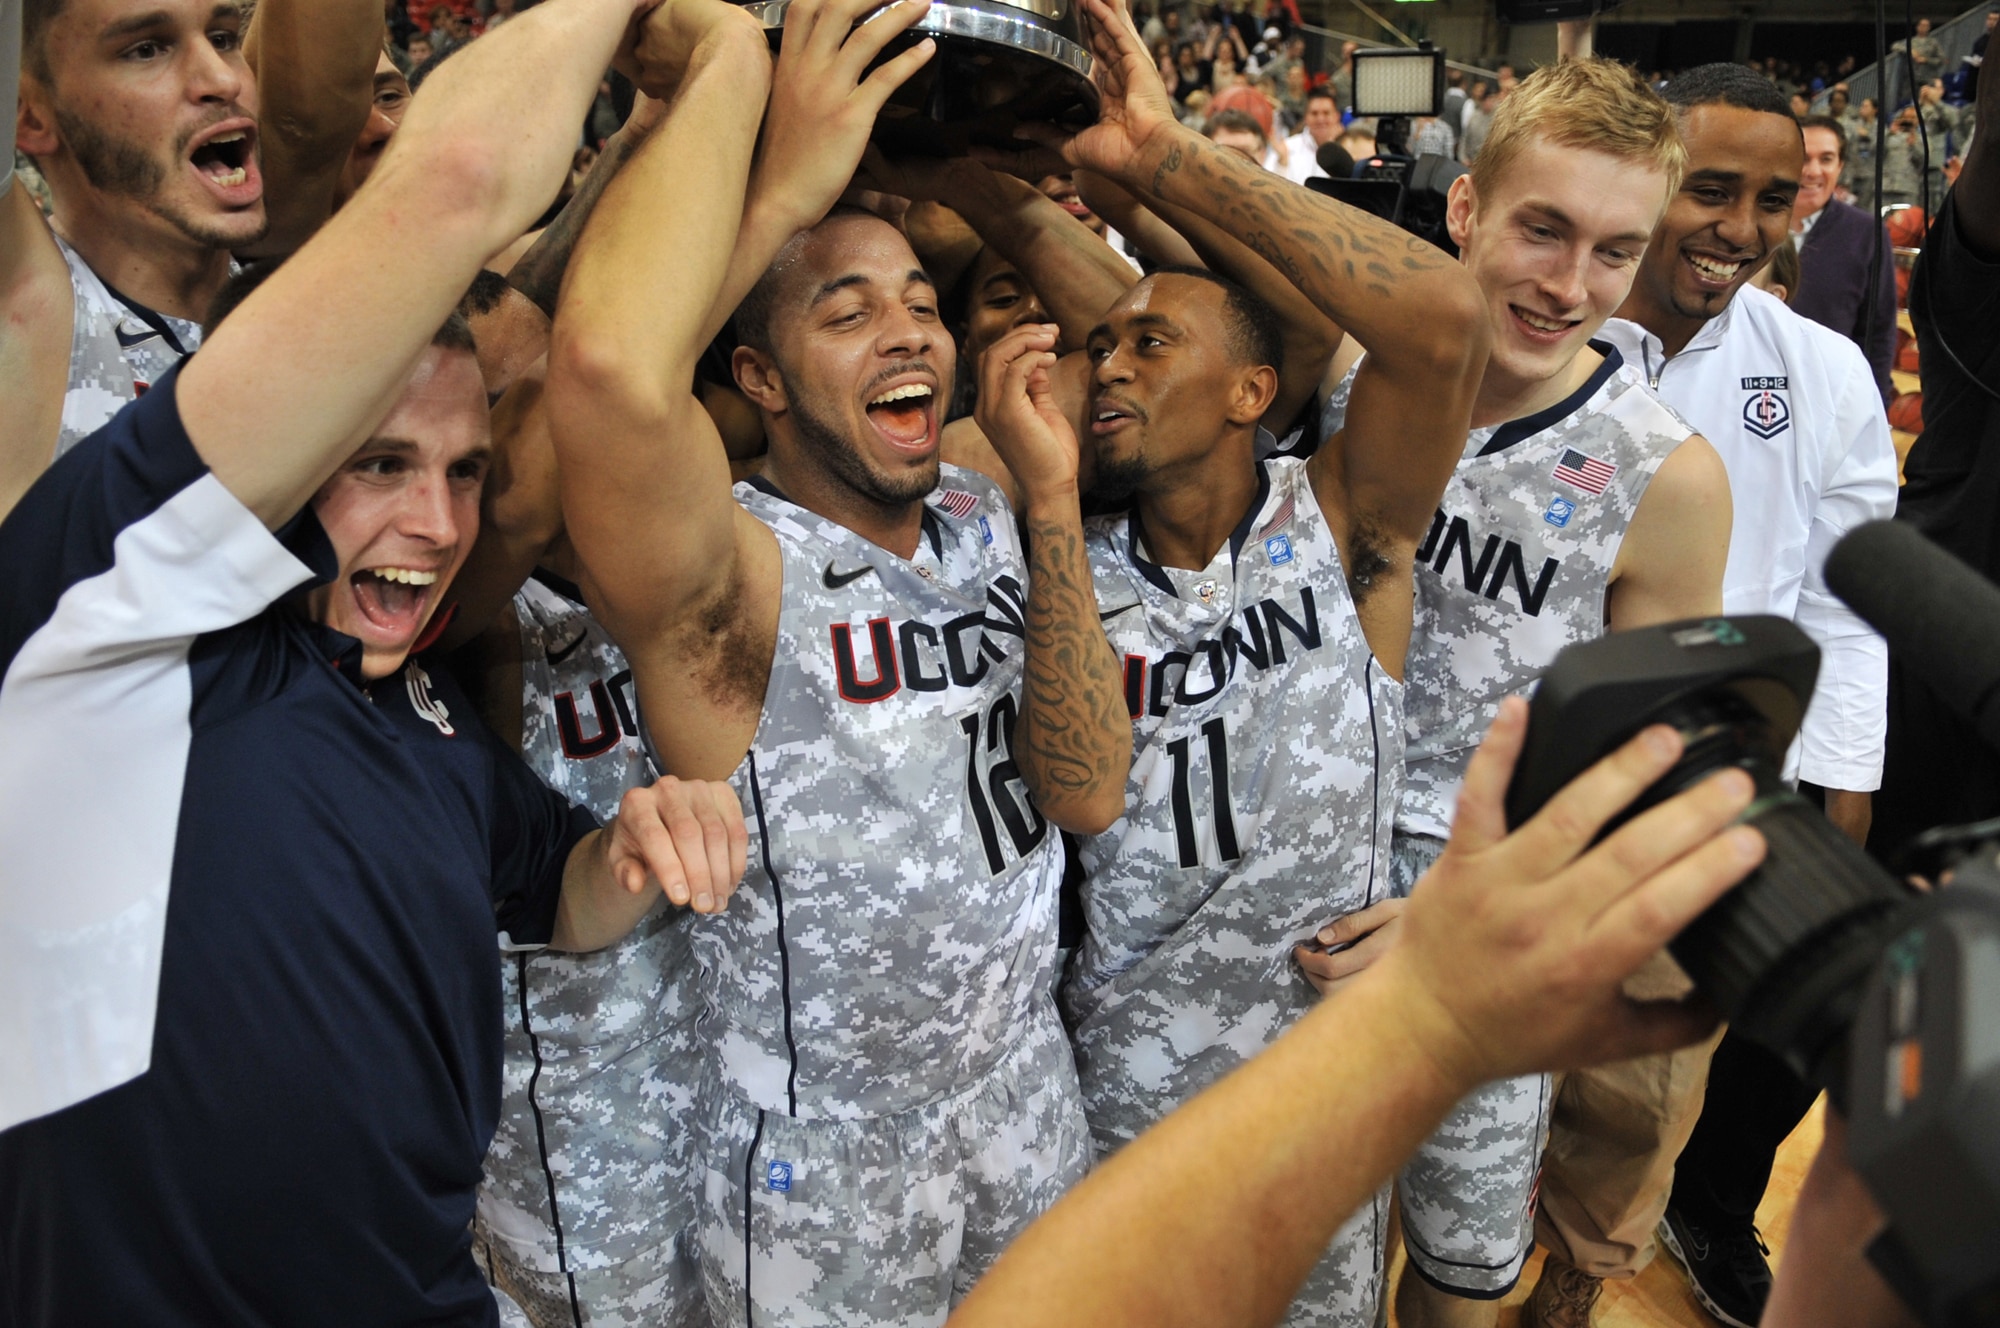 University of Connecticut players celebrate their victory over Michigan State during the Armed Forces Classic basketball at Ramstein Air Base, Germany, Nov. 10, 2012. Connecticut overcame Michigan 66-62. (U.S. Air Force photo/Master Sgt. Wayne Clark)